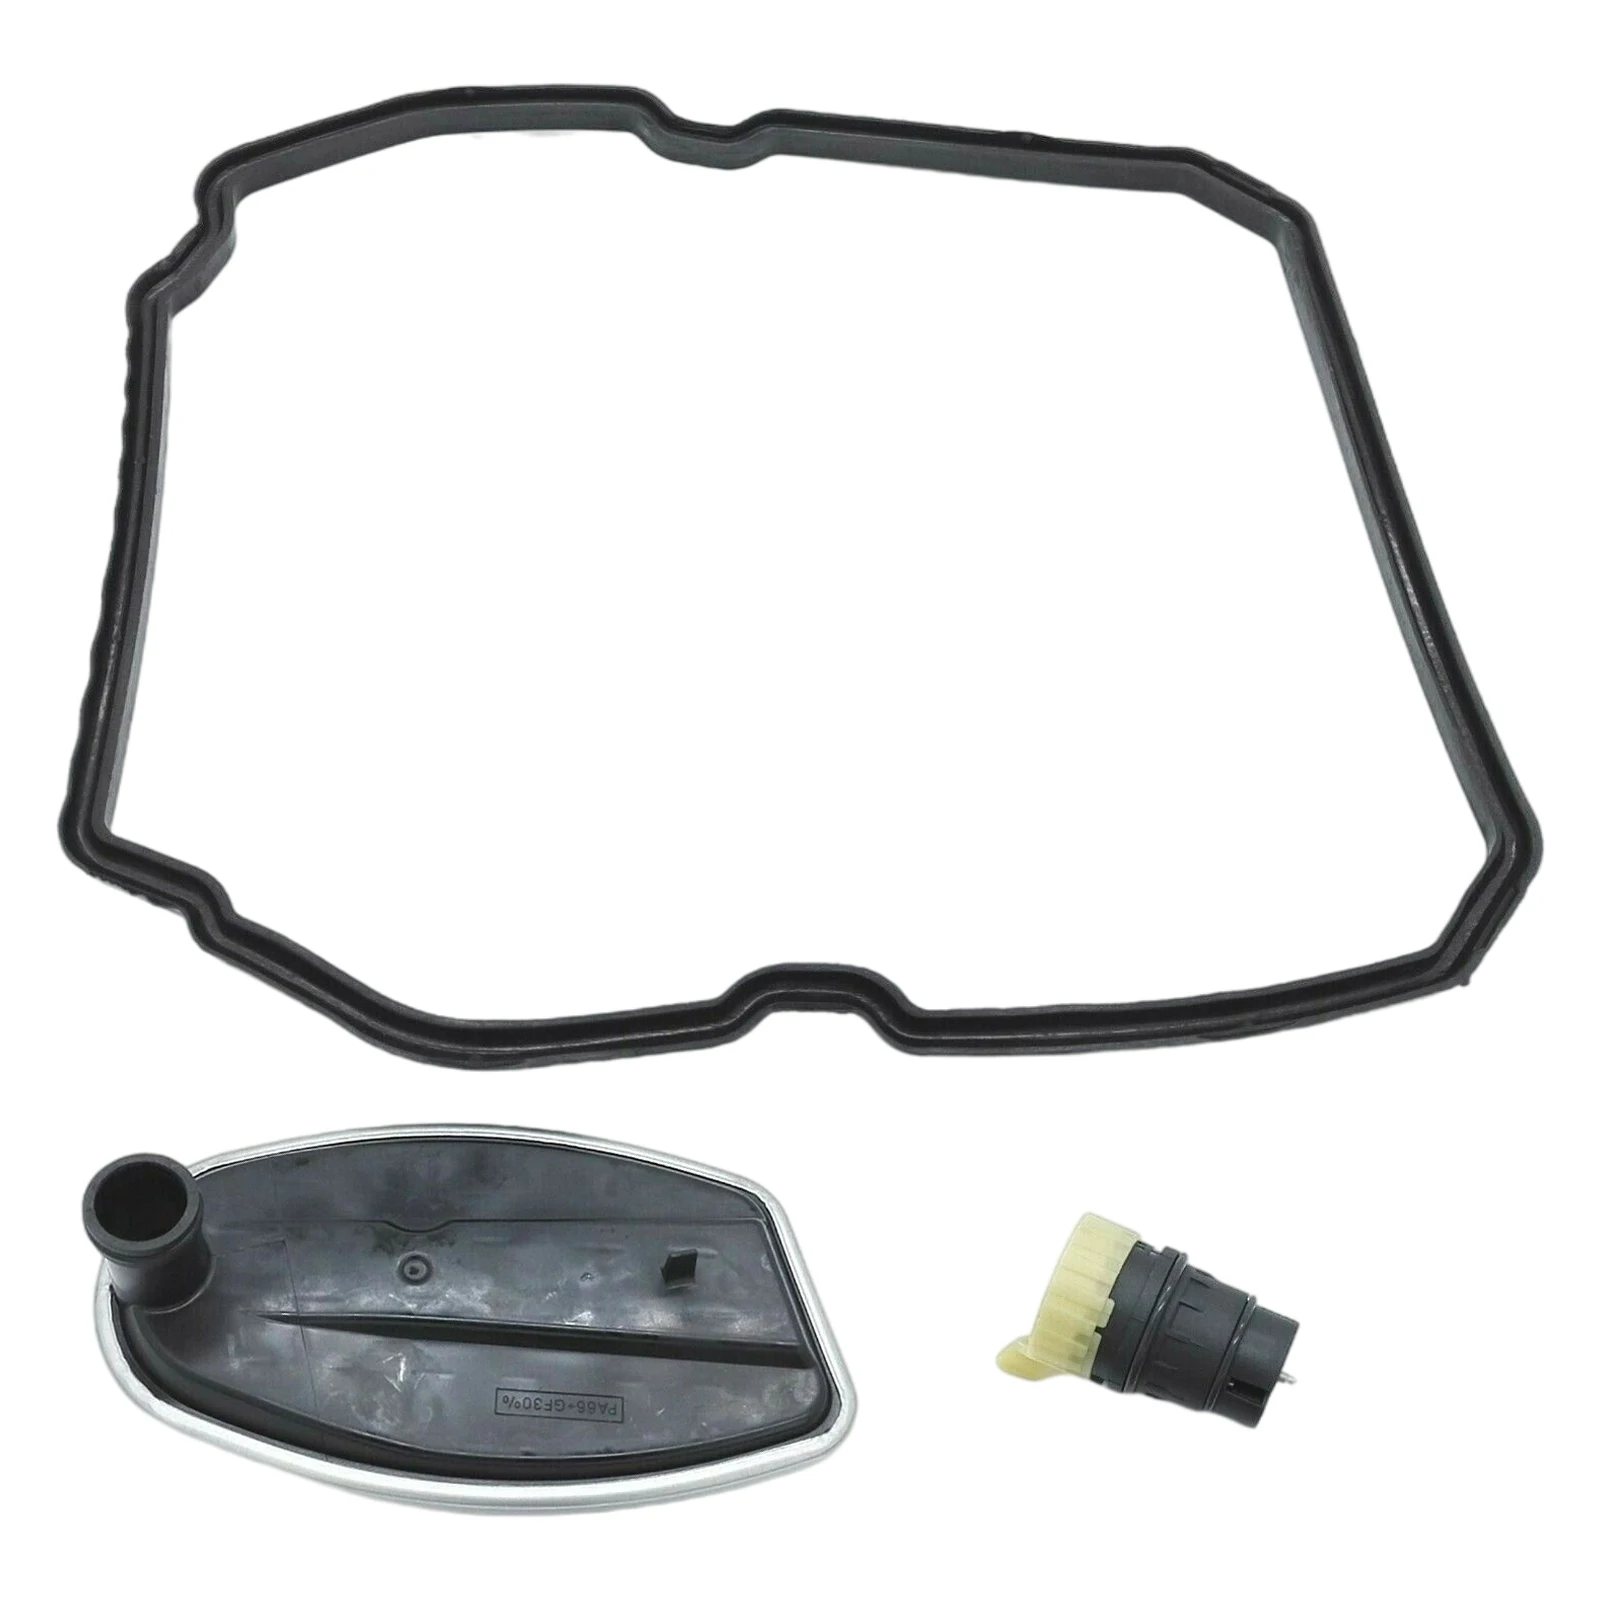 Transmission Filter Kit Professional Durable 22.6 Drive Elements for   